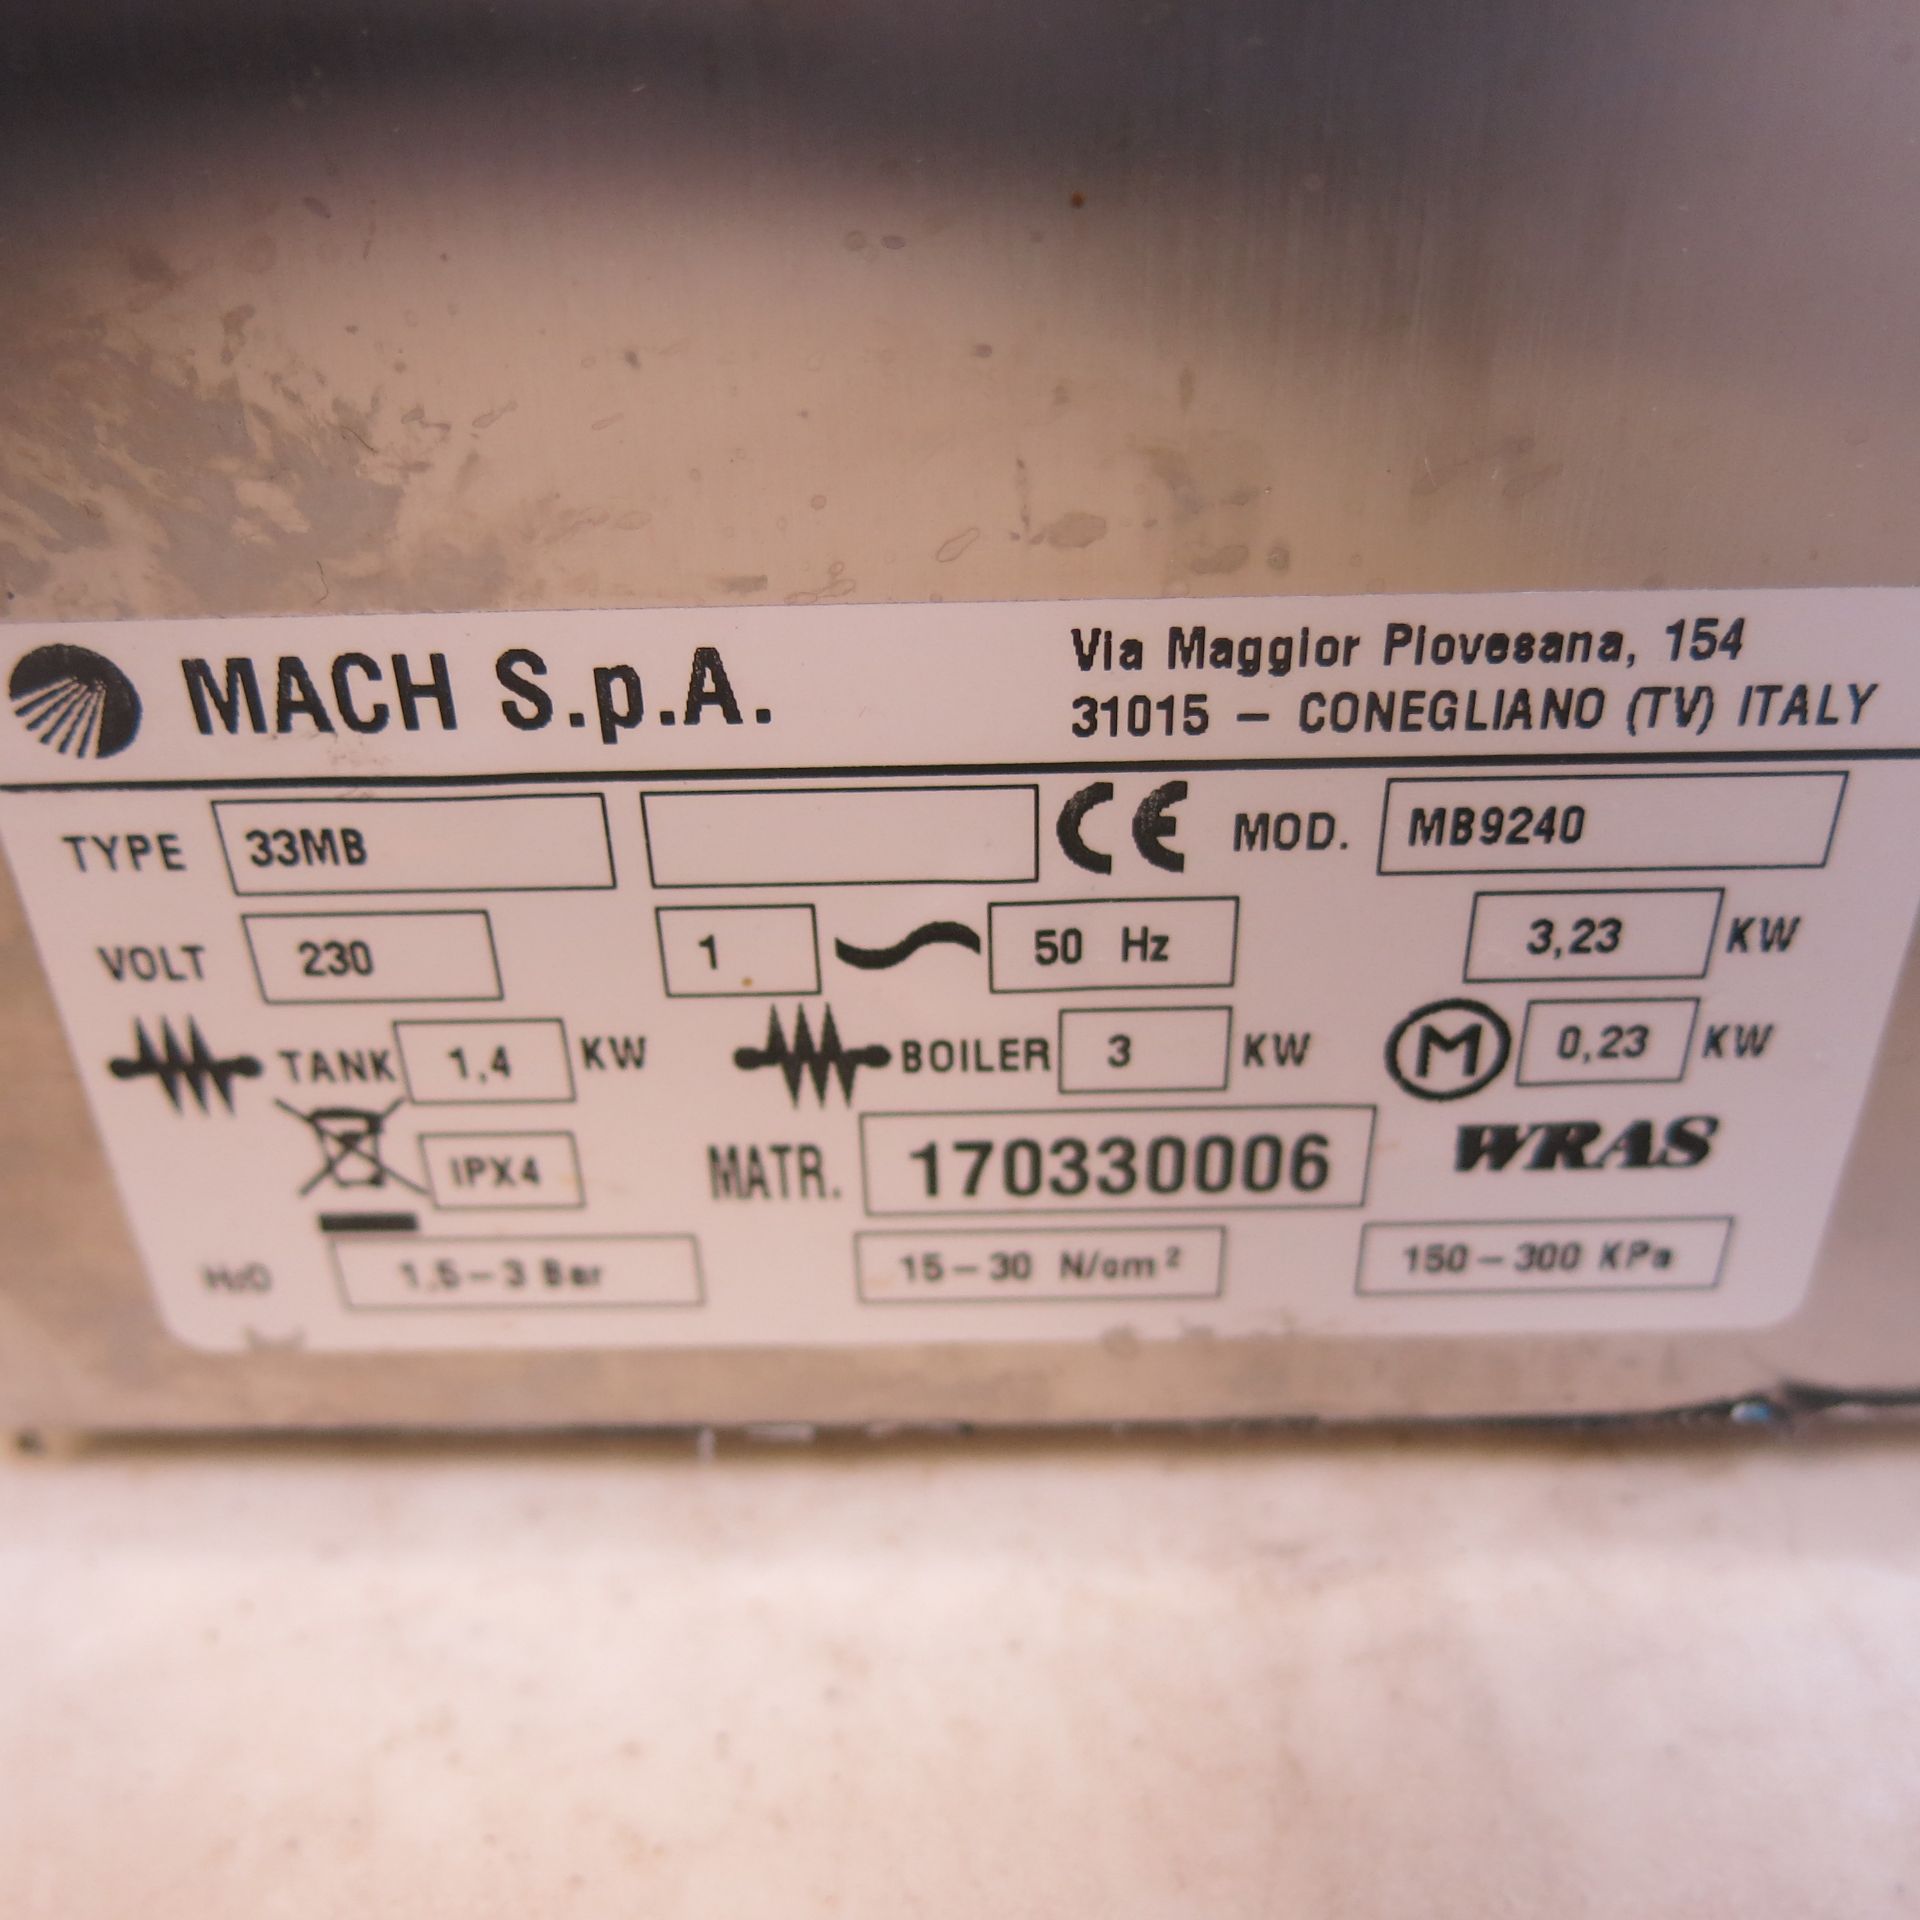 MACH Commercial High Speed Dishwasher, Model MB9240. Comes with 2 Trays. - Image 3 of 6